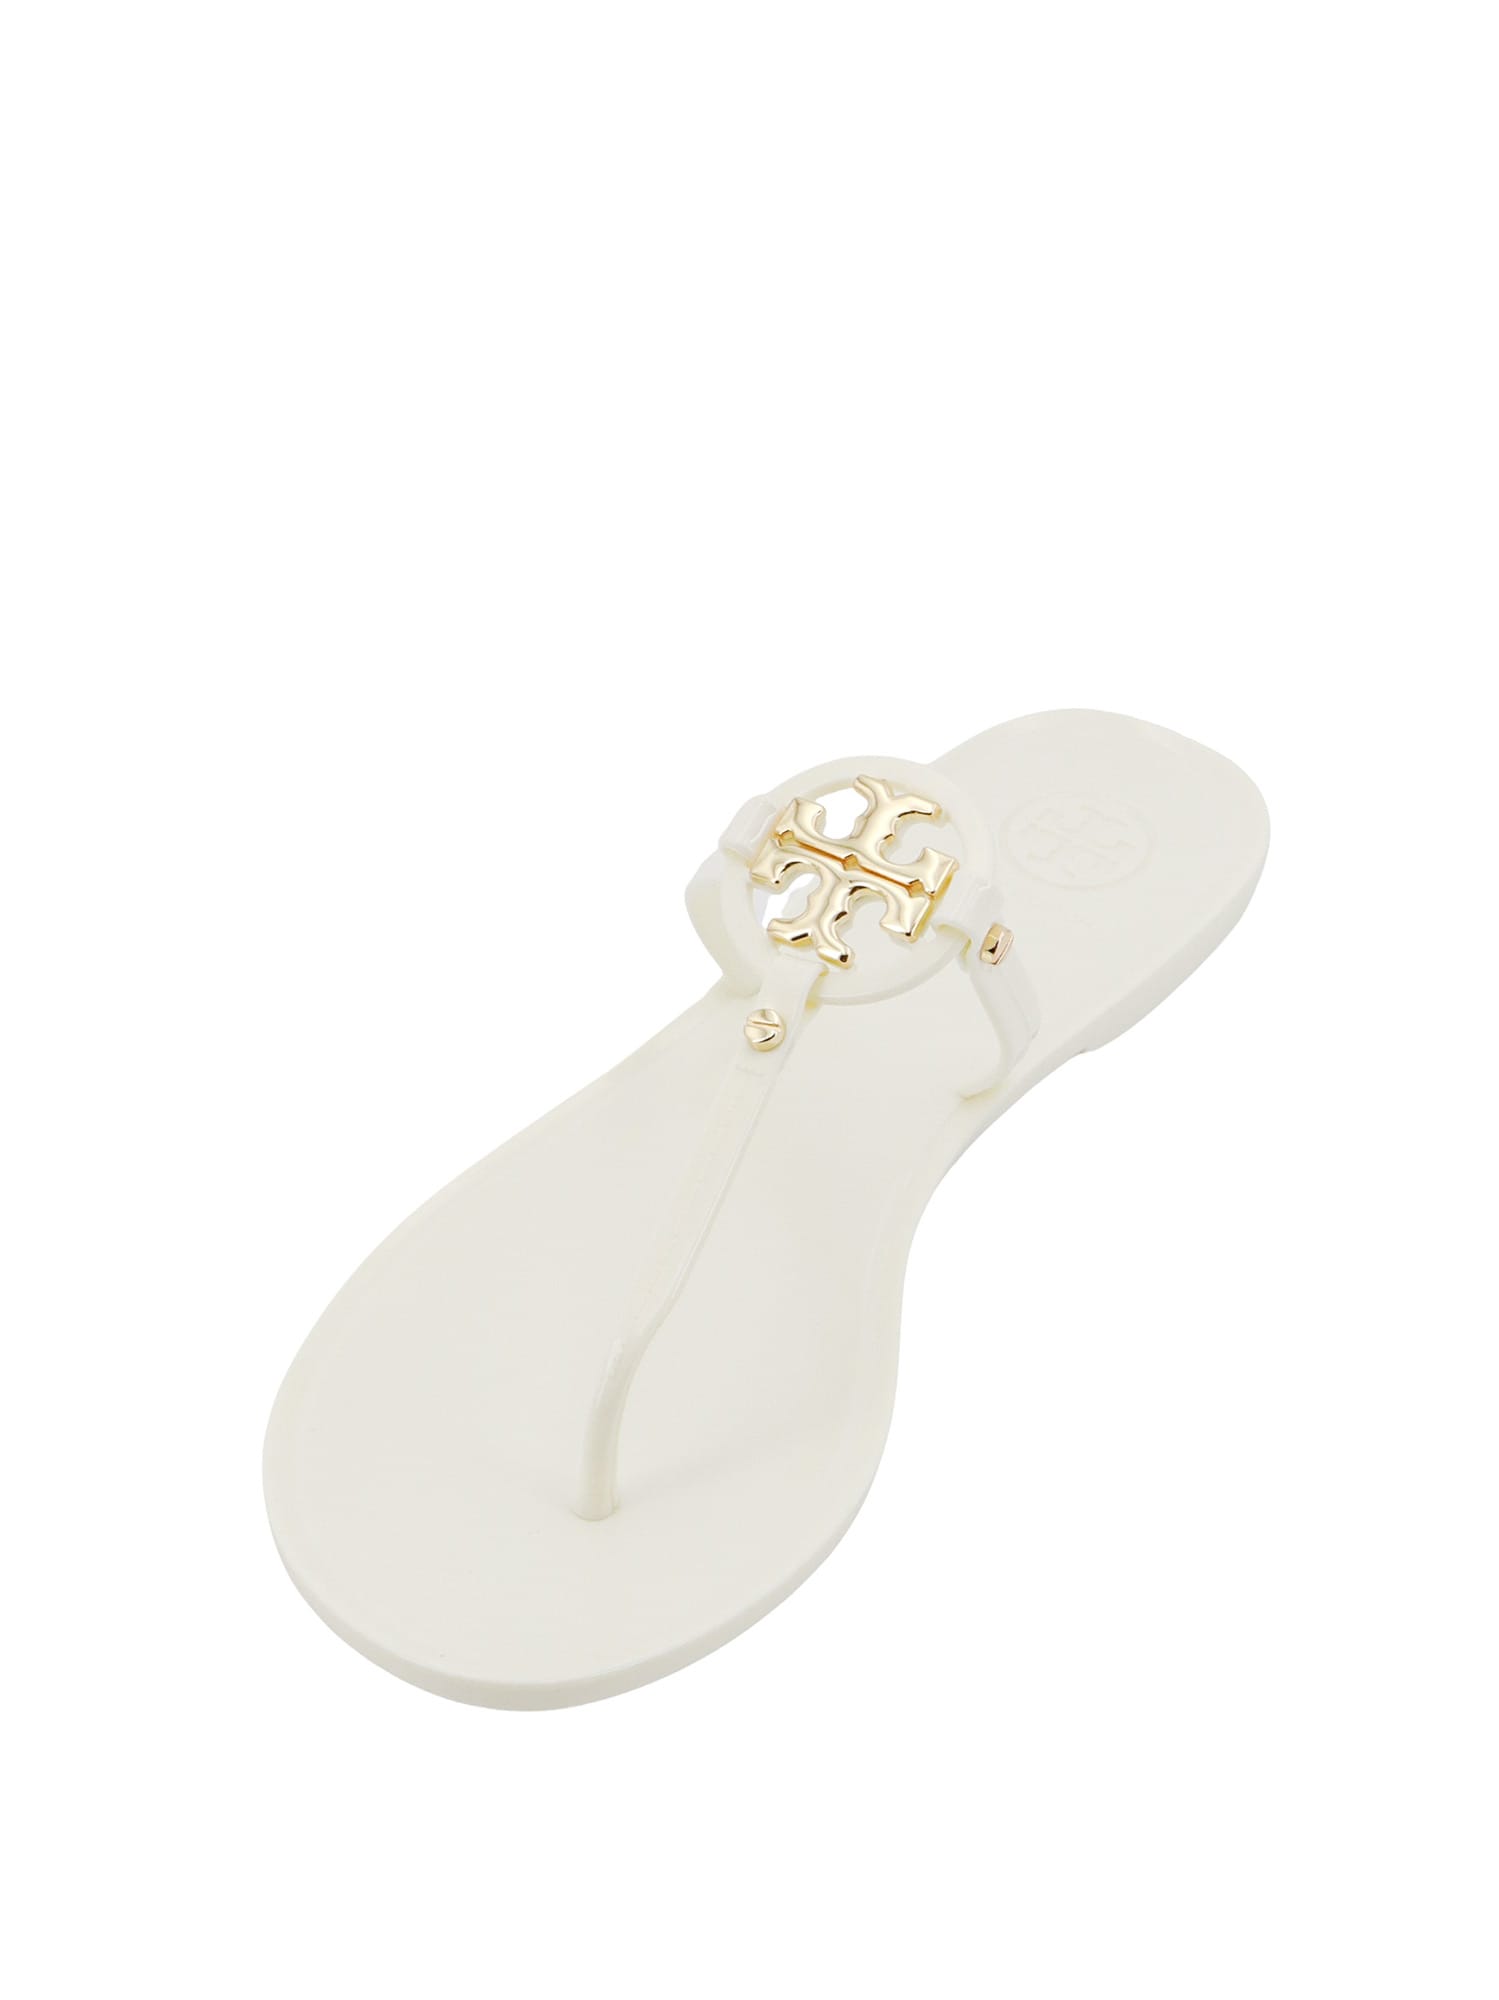 Shop Tory Burch Roxanne Jelly Sandals In White